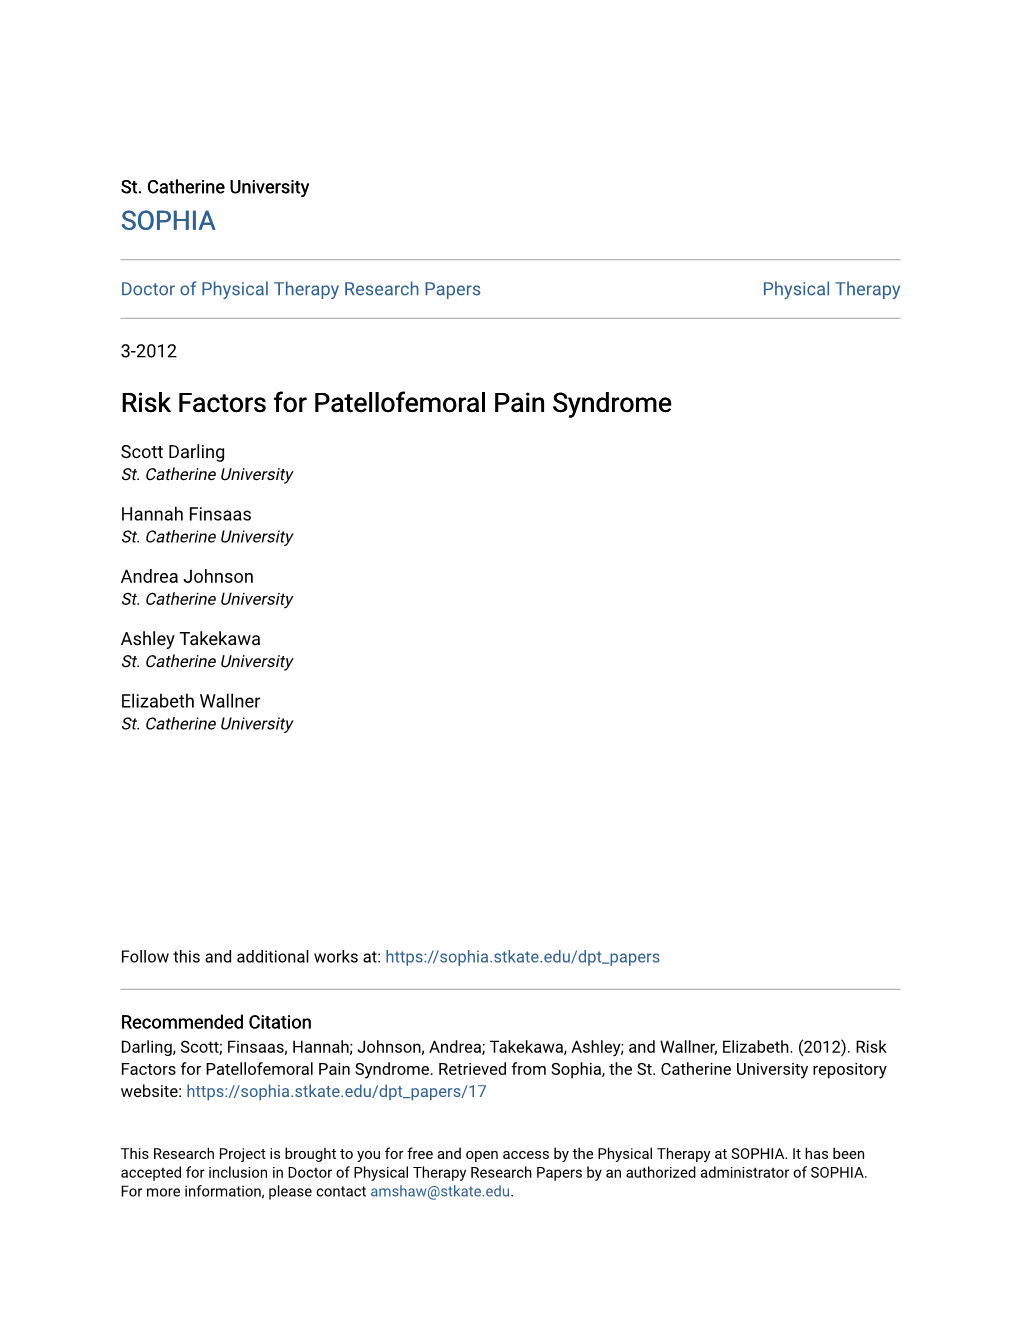 Risk Factors for Patellofemoral Pain Syndrome